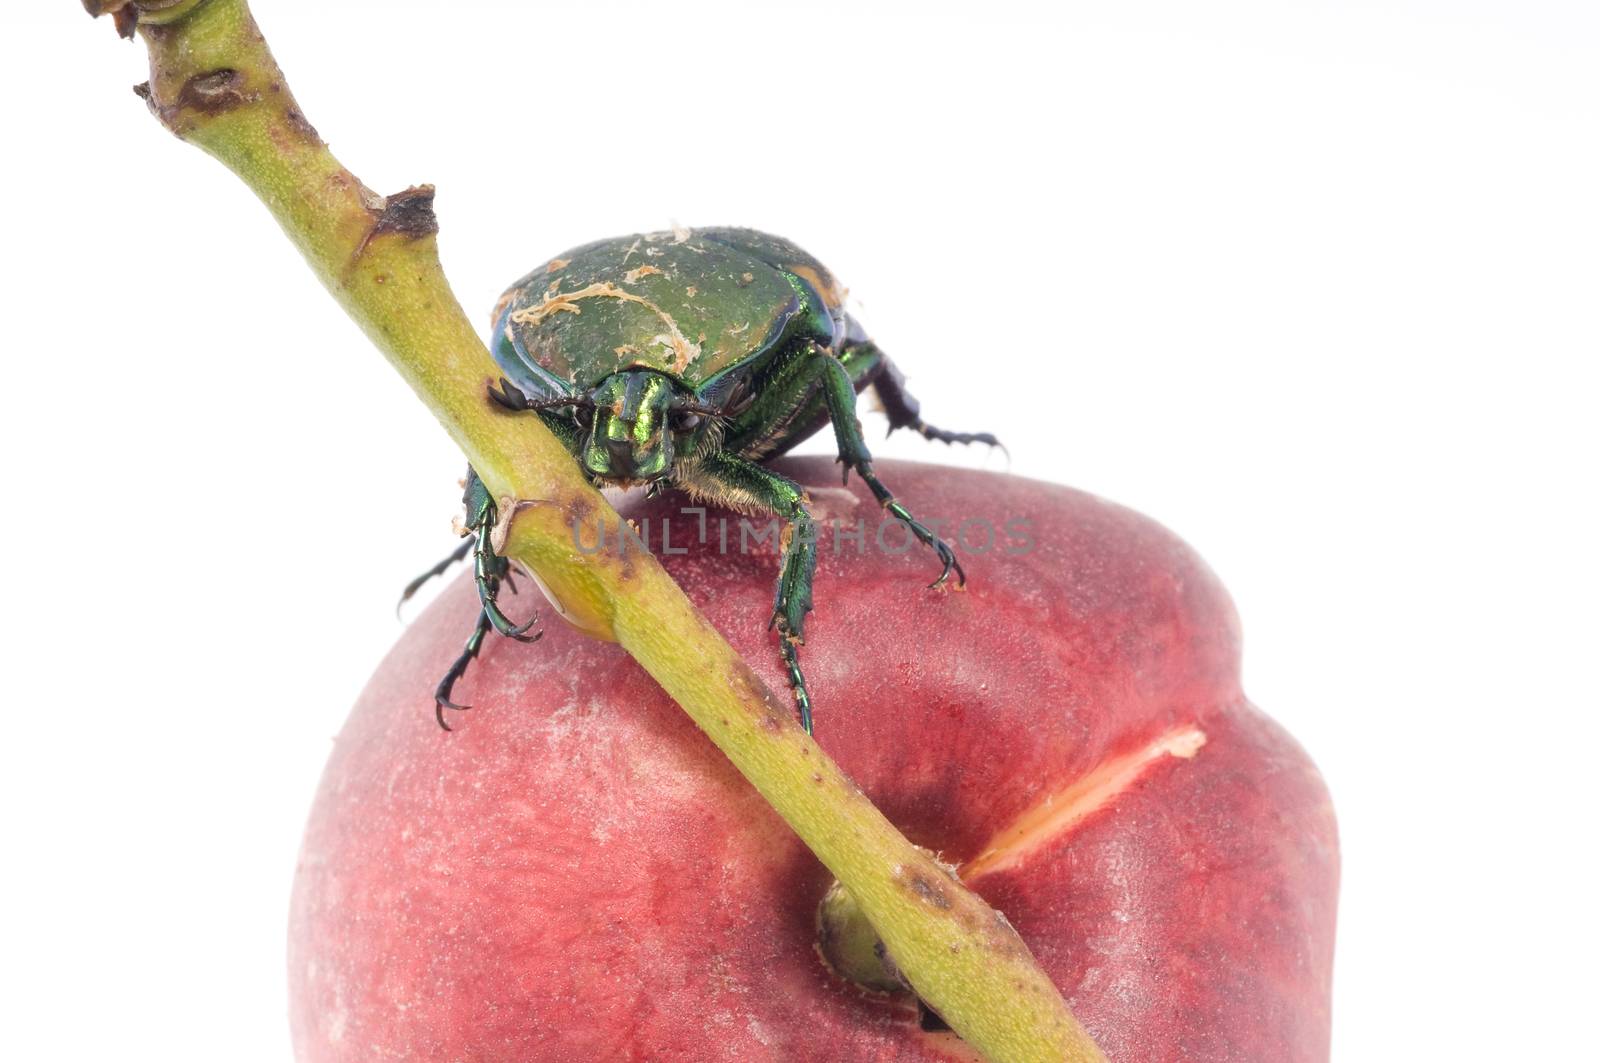 Mettalic green fig beetle (Cotinus texana) on apricot by Njean